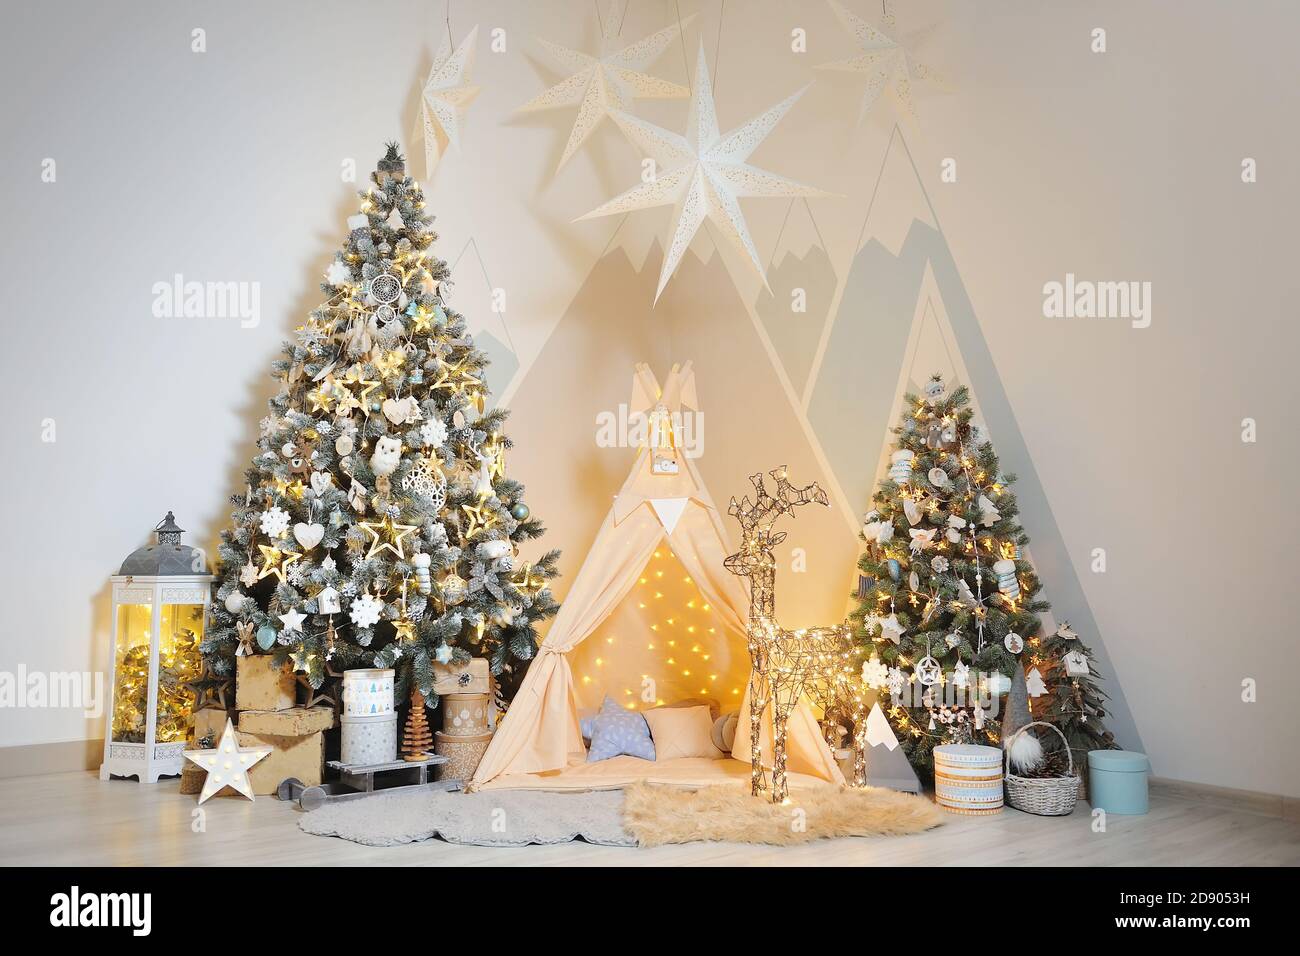 Playroom for children with Christmas decorations, gifts, tent and Christmas trees Stock Photo